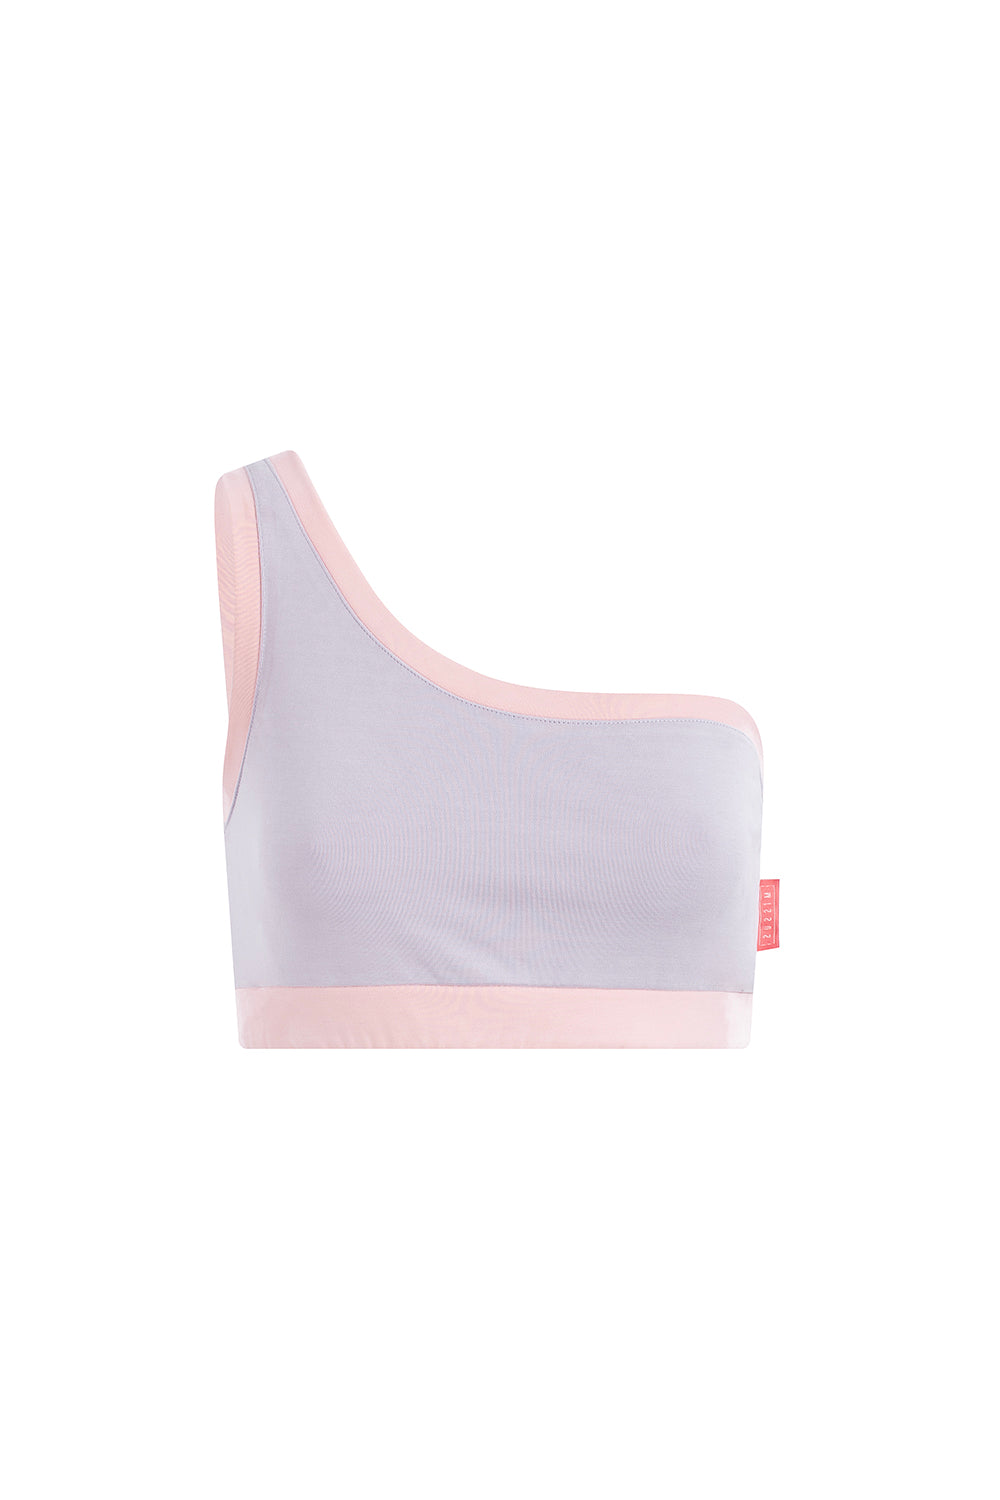 SOFT TOUCH ONE SHOULDER LILAC CROP TOP V2